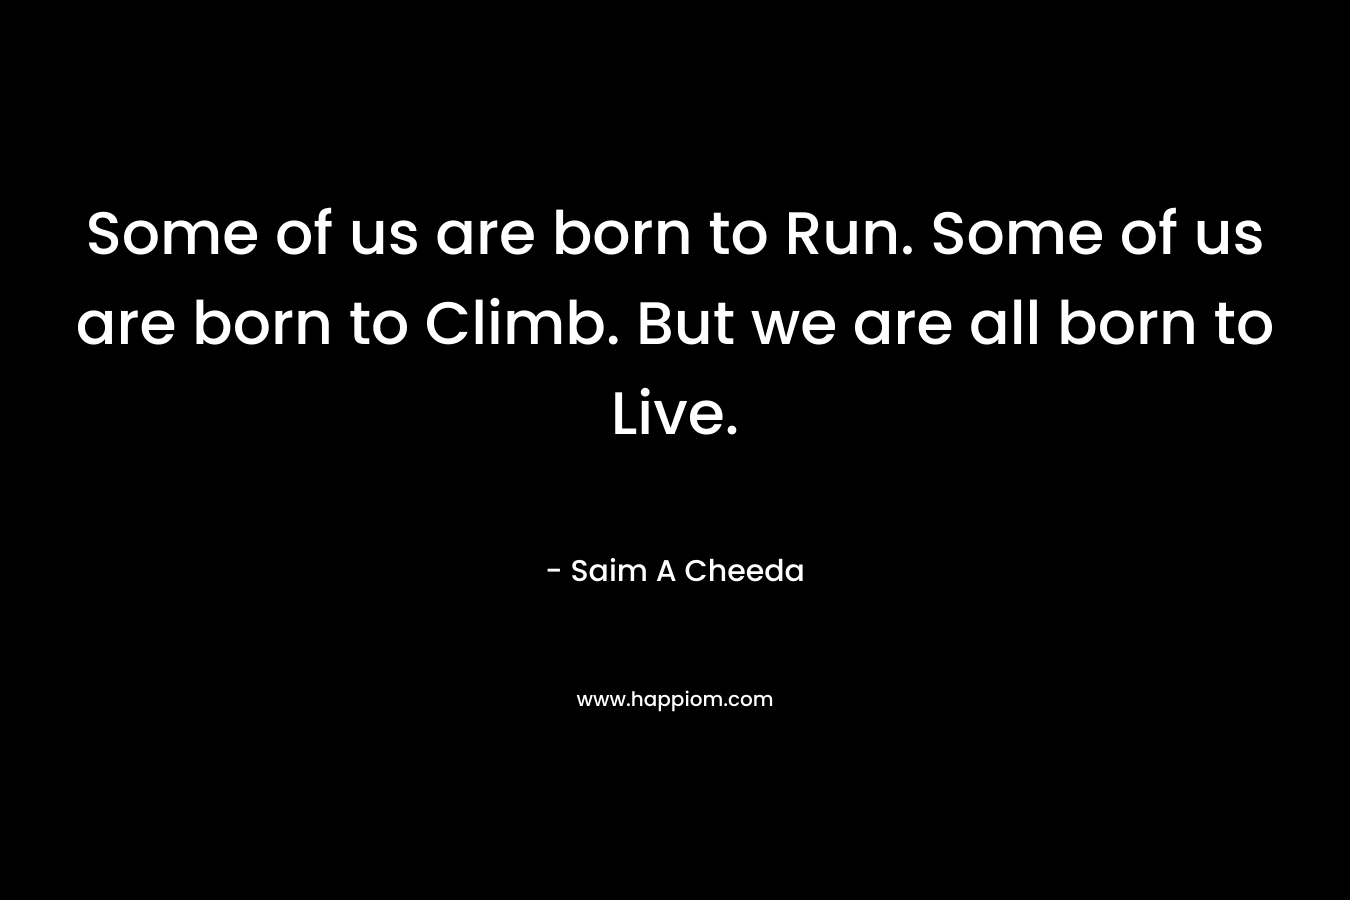 Some of us are born to Run. Some of us are born to Climb. But we are all born to Live.